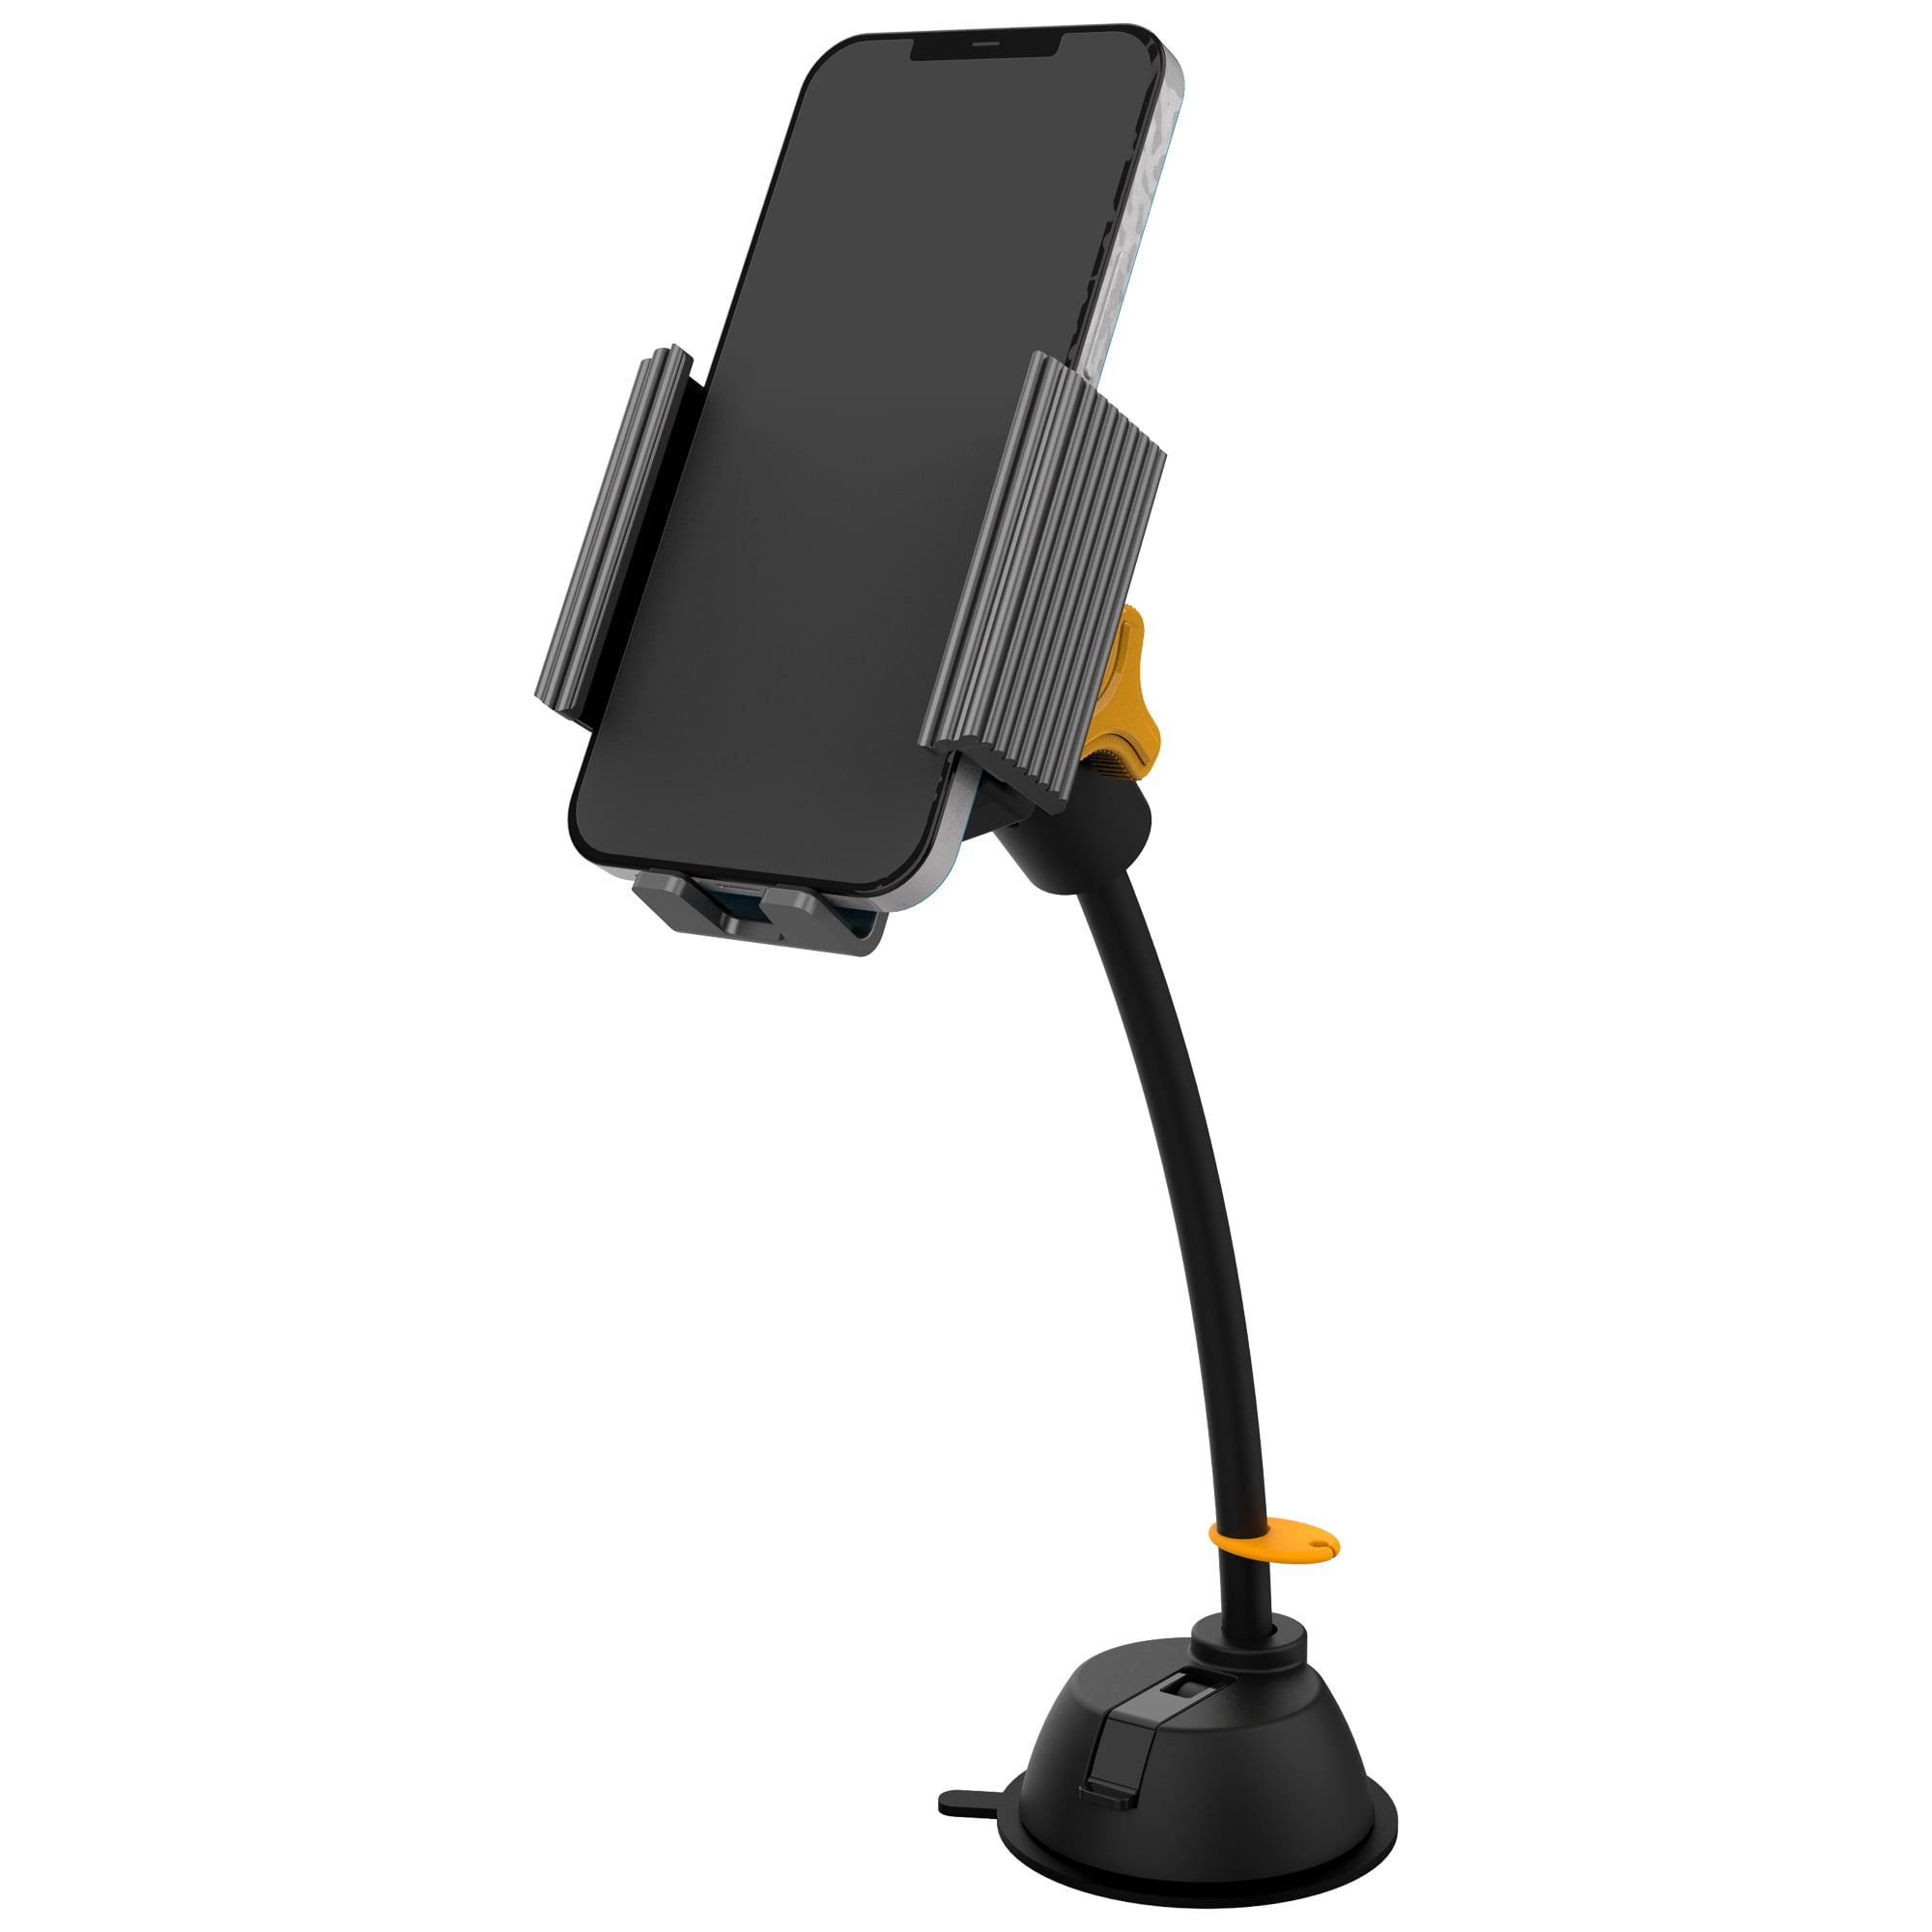 Armor All Suction Mount with Magnet: Versatile Smartphone Holder,  360-Degree Rotation, Hands-Free Calls/GPS, Cable Management